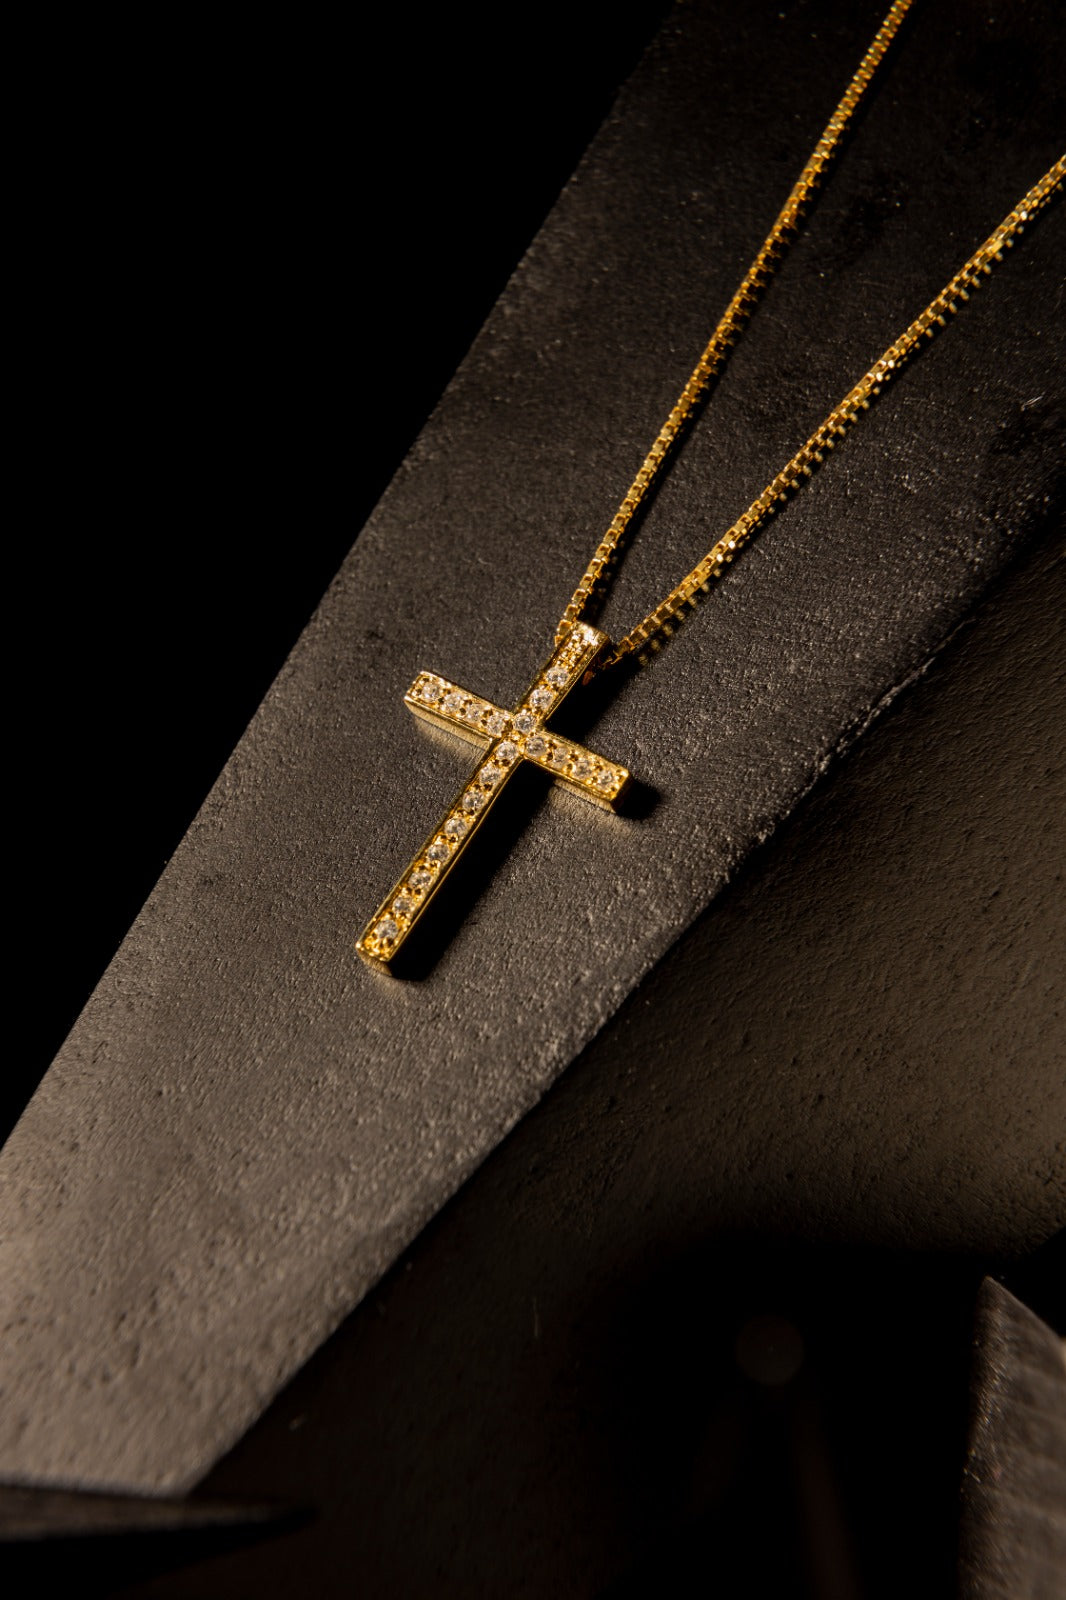 Necklace Cross 3D Spiked